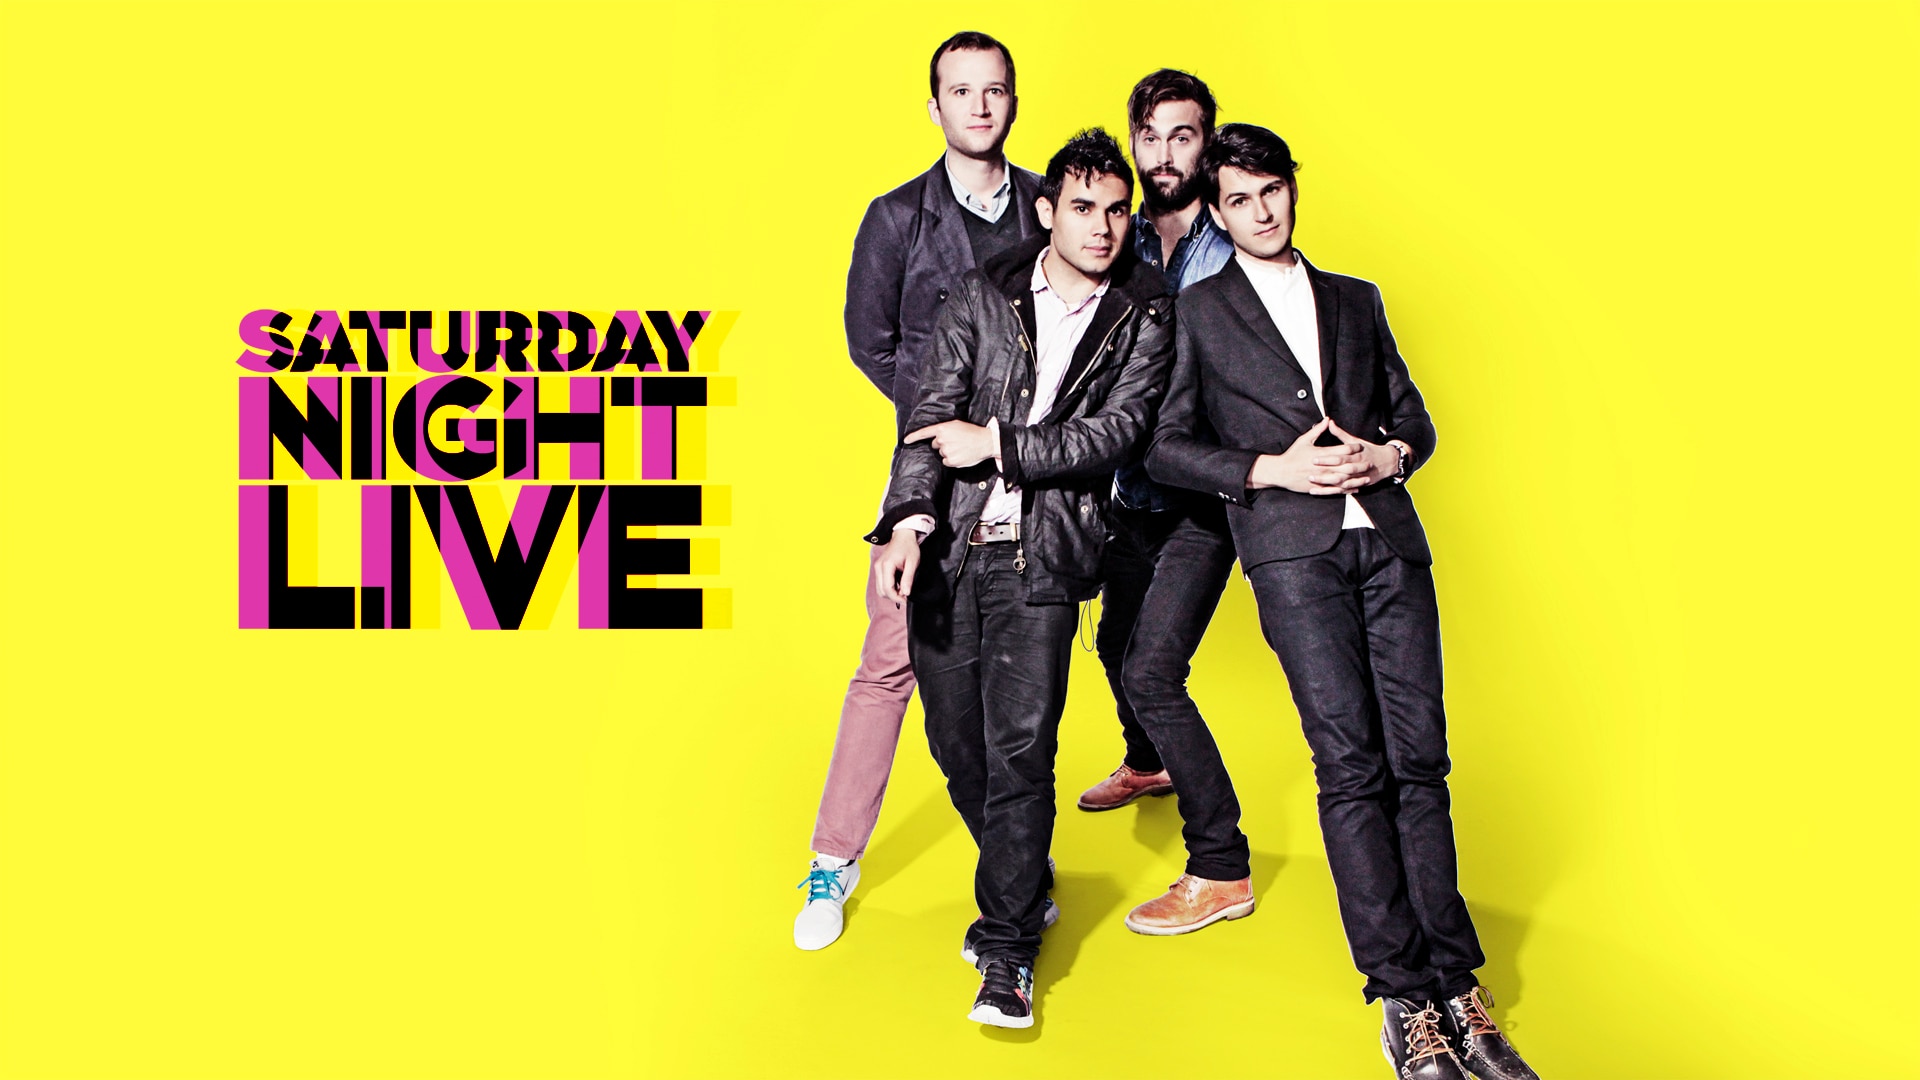 On the weekends saturdays and. Vampire weekend Vampire weekend 2008. Saturday Night Live the weekend. Vampire weekend blurred lines. Vampire weekend Modern Vampires of the City.